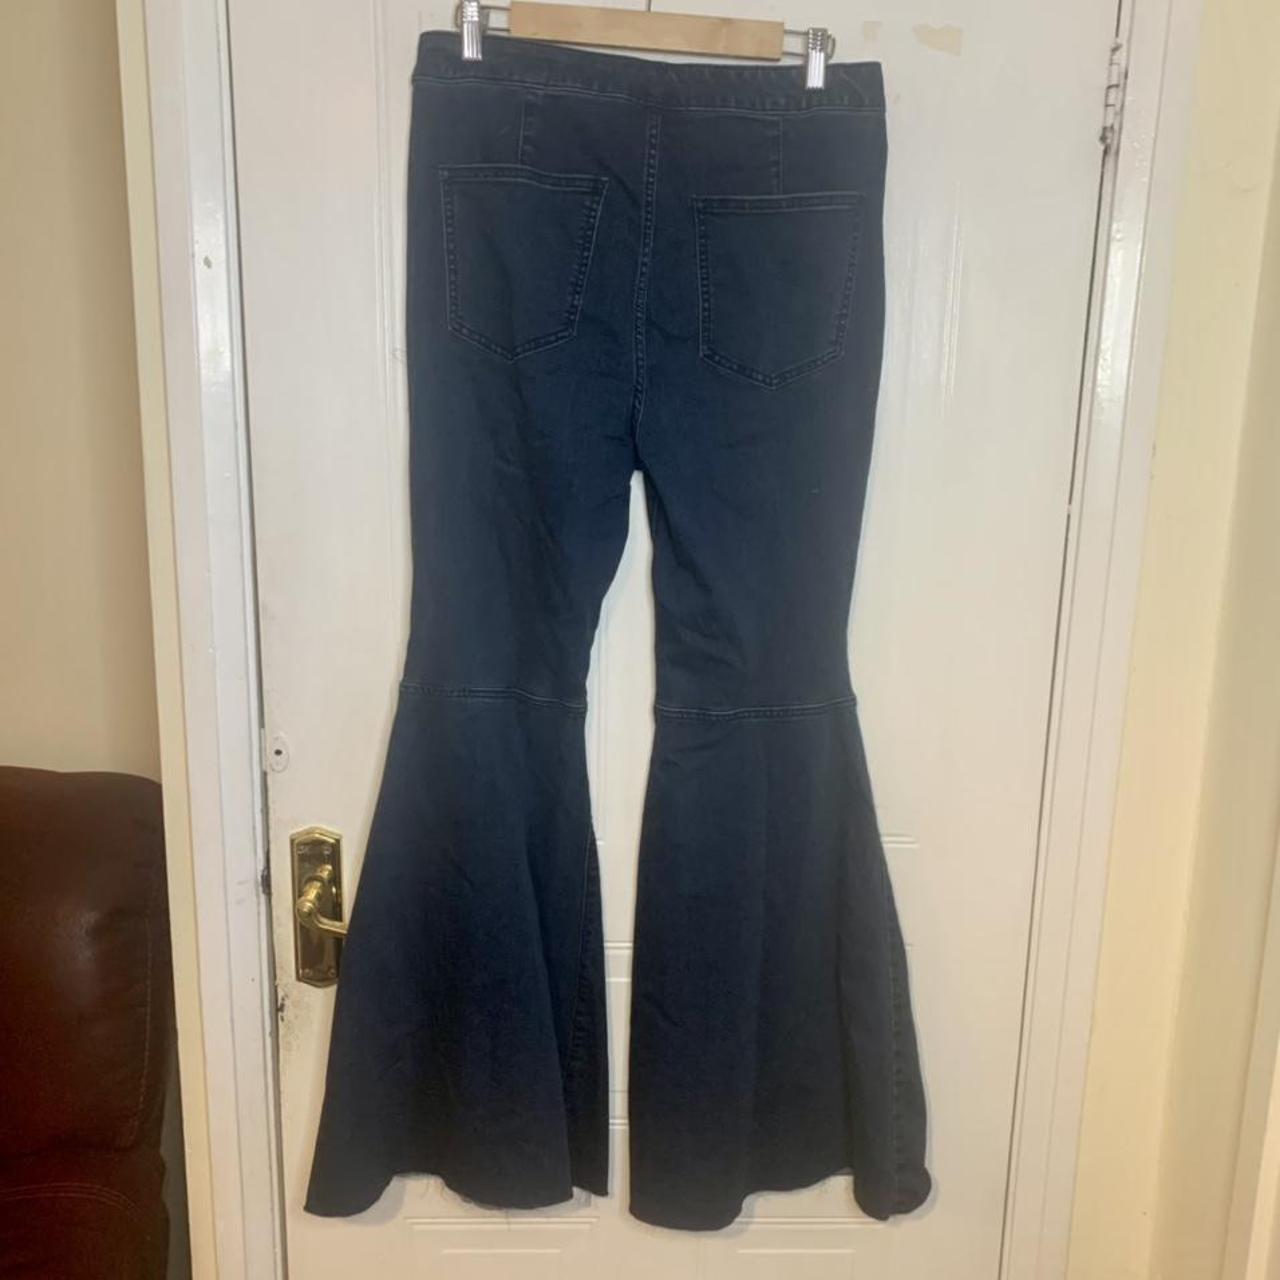 Product Image 3 - Free people flares
Bell bottoms
Size UK